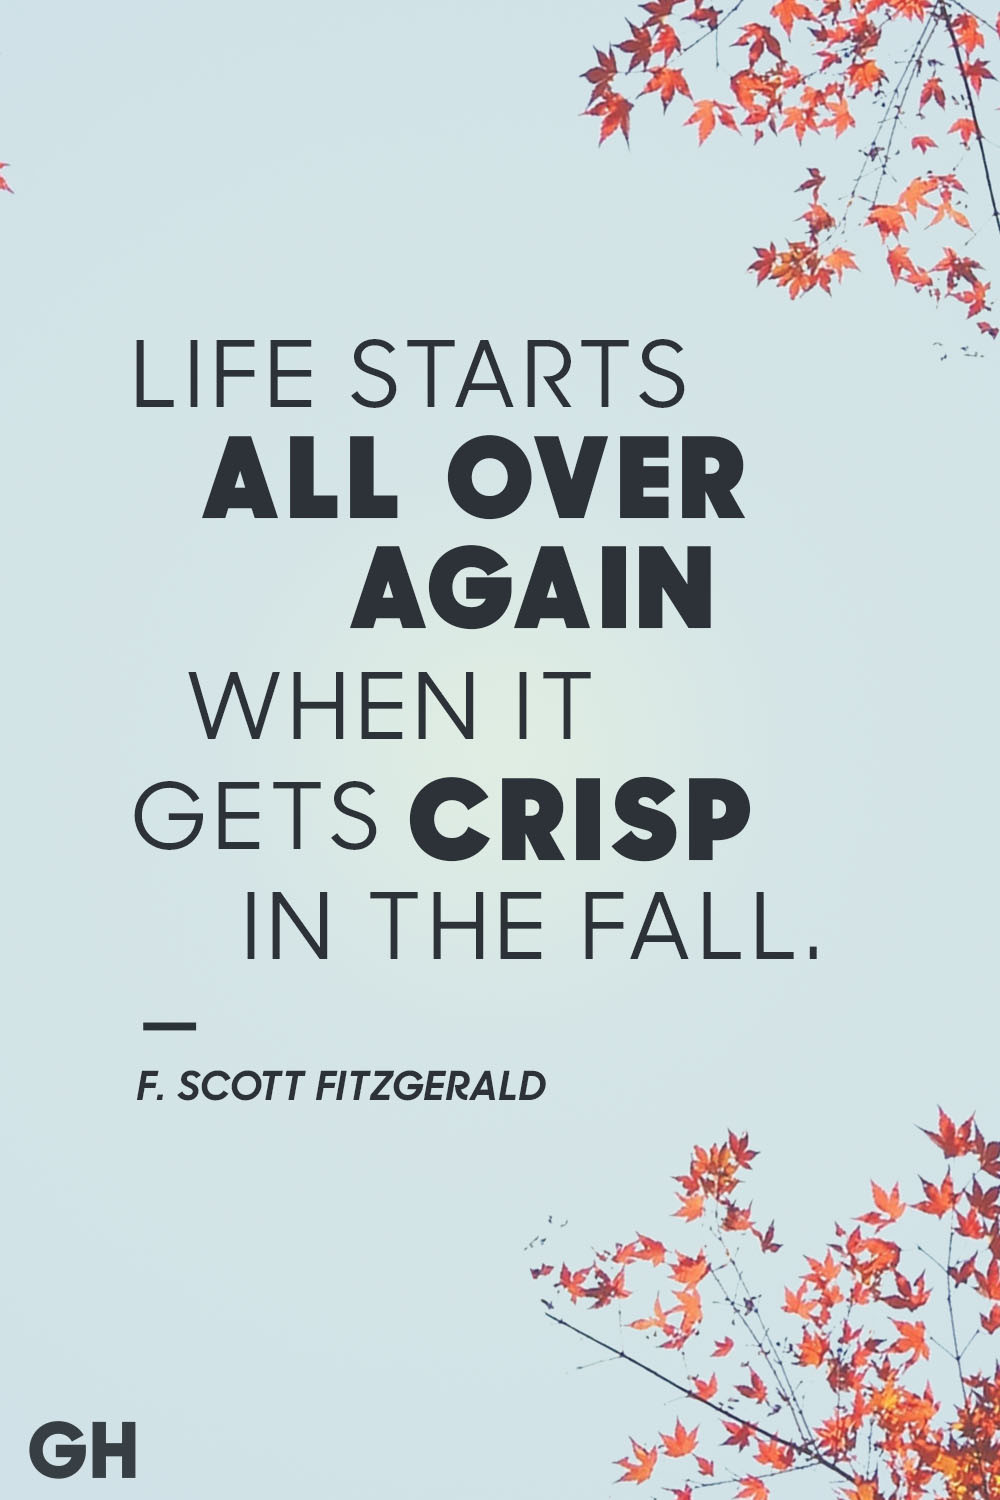 Quotes About The Fall
 15 Best Fall Quotes Sayings About Autumn